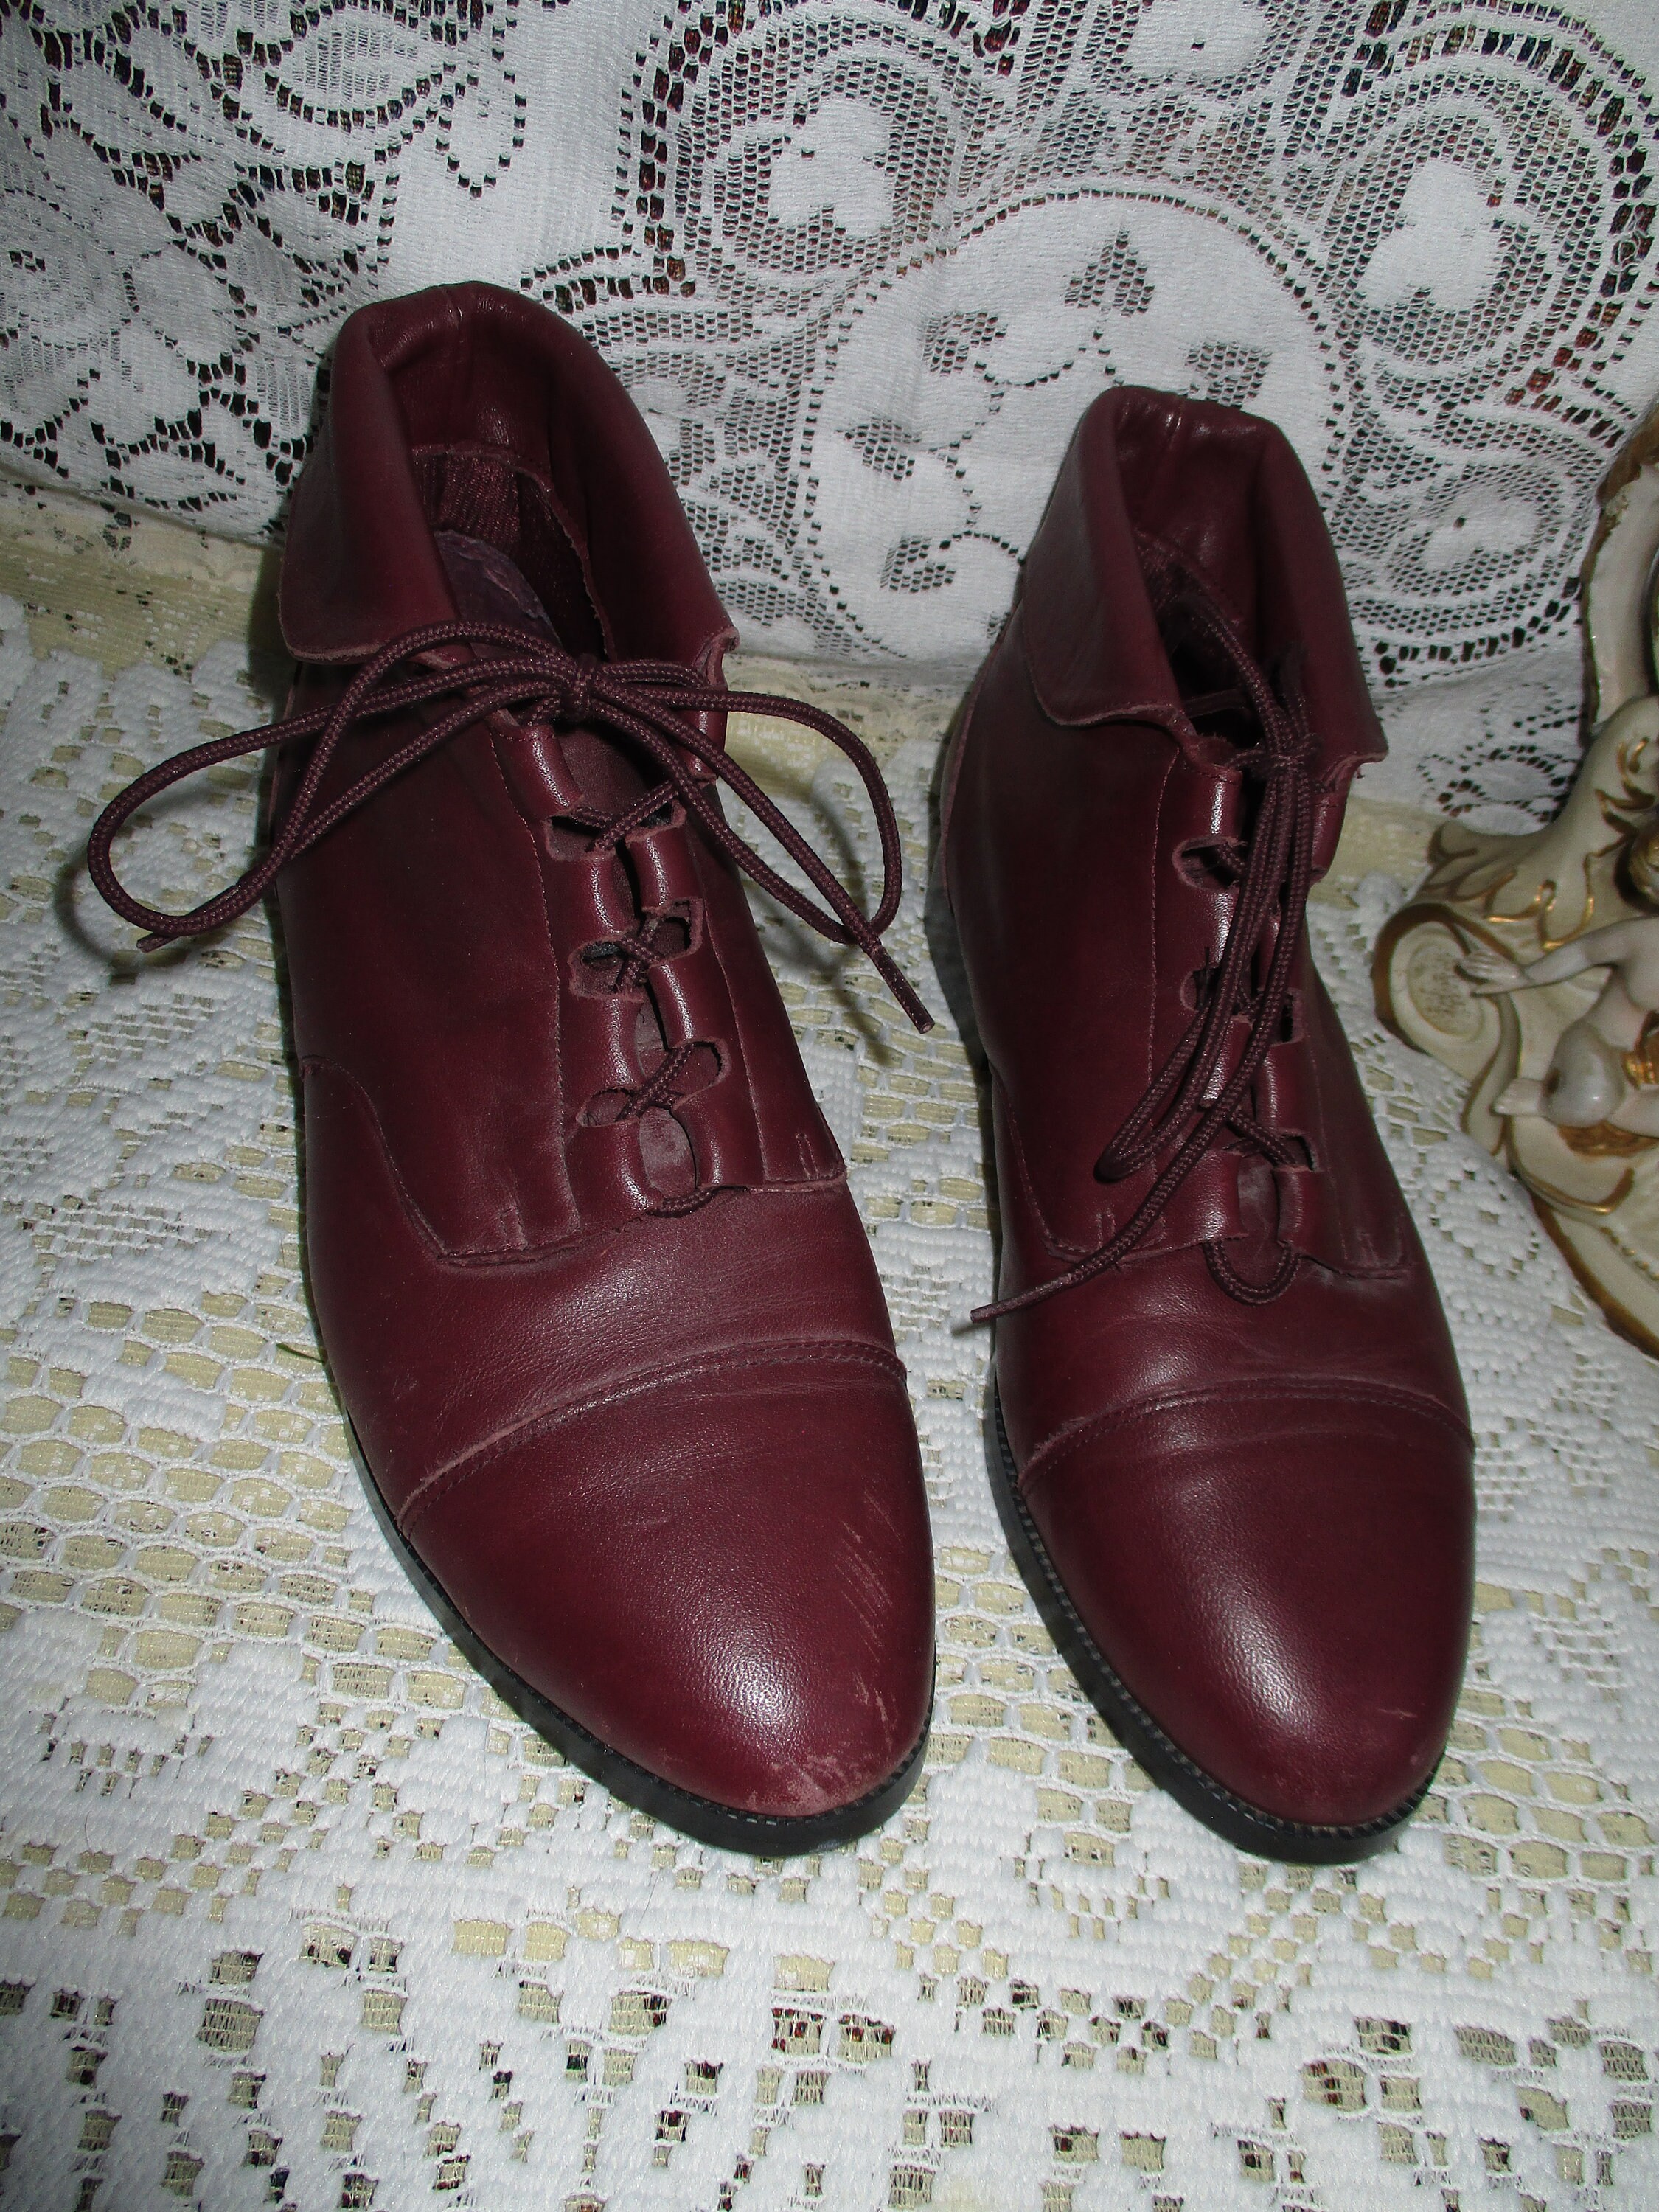 80s Burgundy Leather Ankle Boots by Prima Royale Pixie Hipster | Etsy